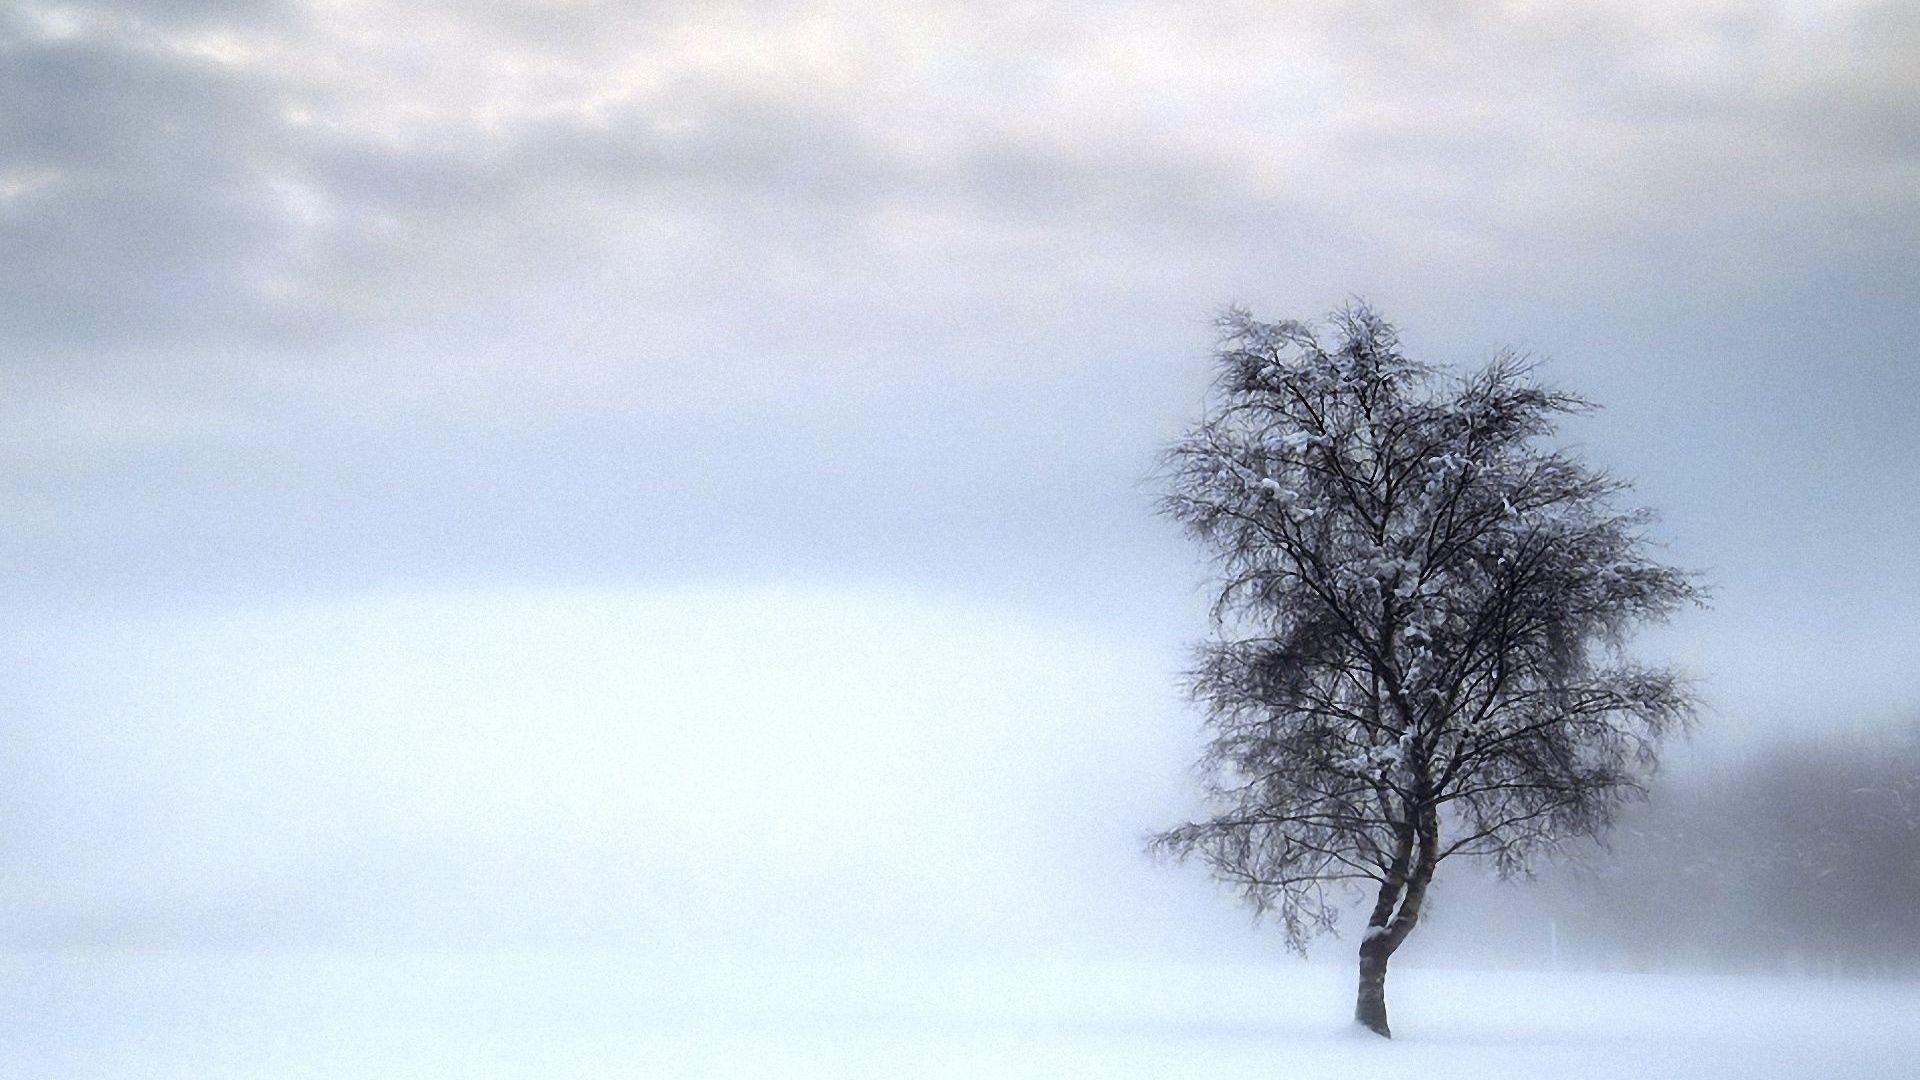 Download Wallpaper 1920x1080 tree, lonely, winter, gloomy, snow Full